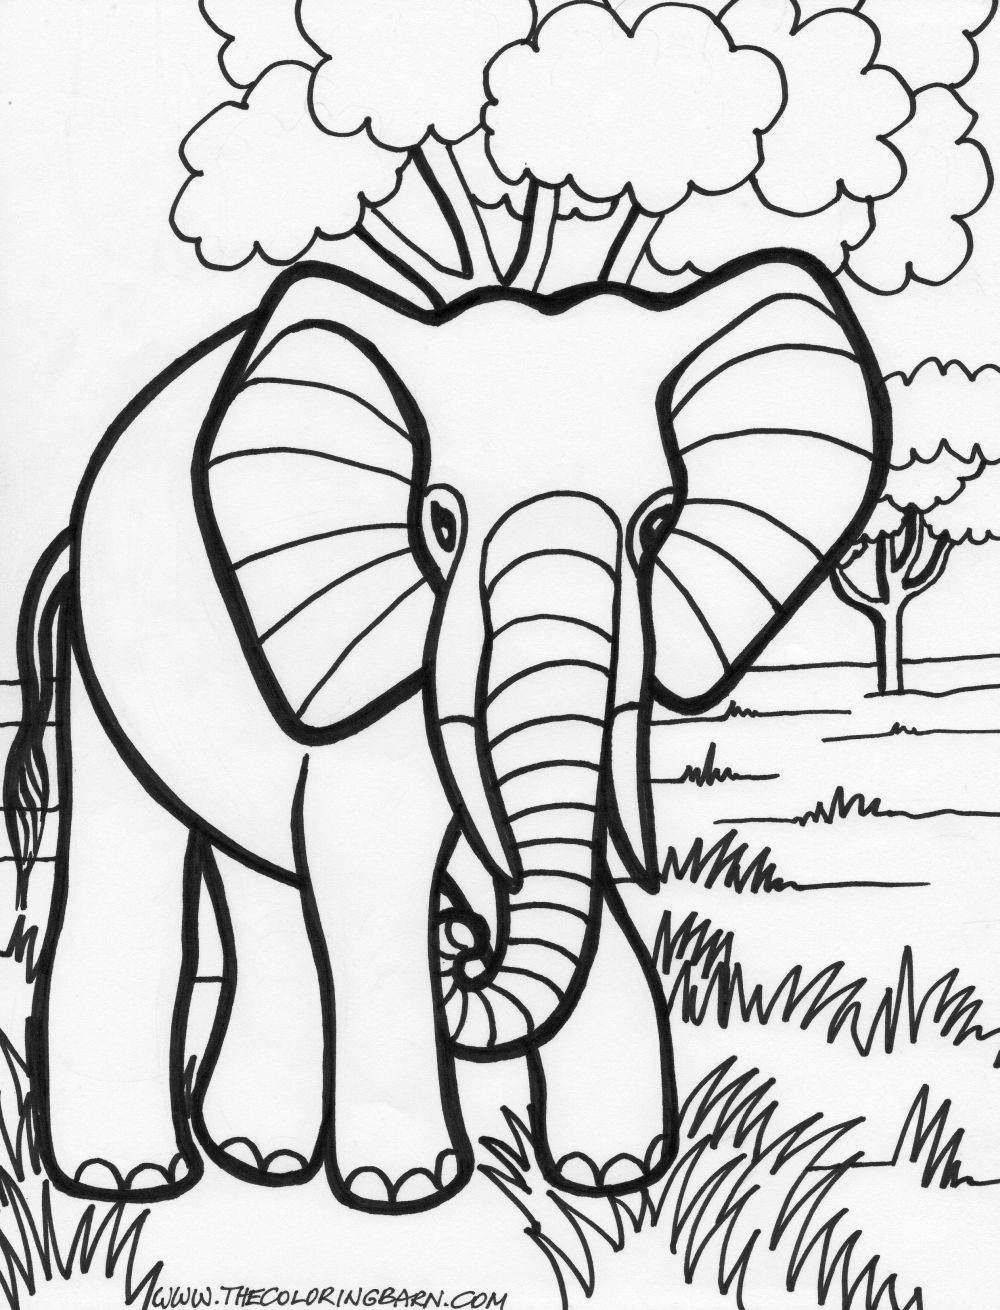 Elephant Coloring Book
 Black beauty 18 Elephant coloring pages